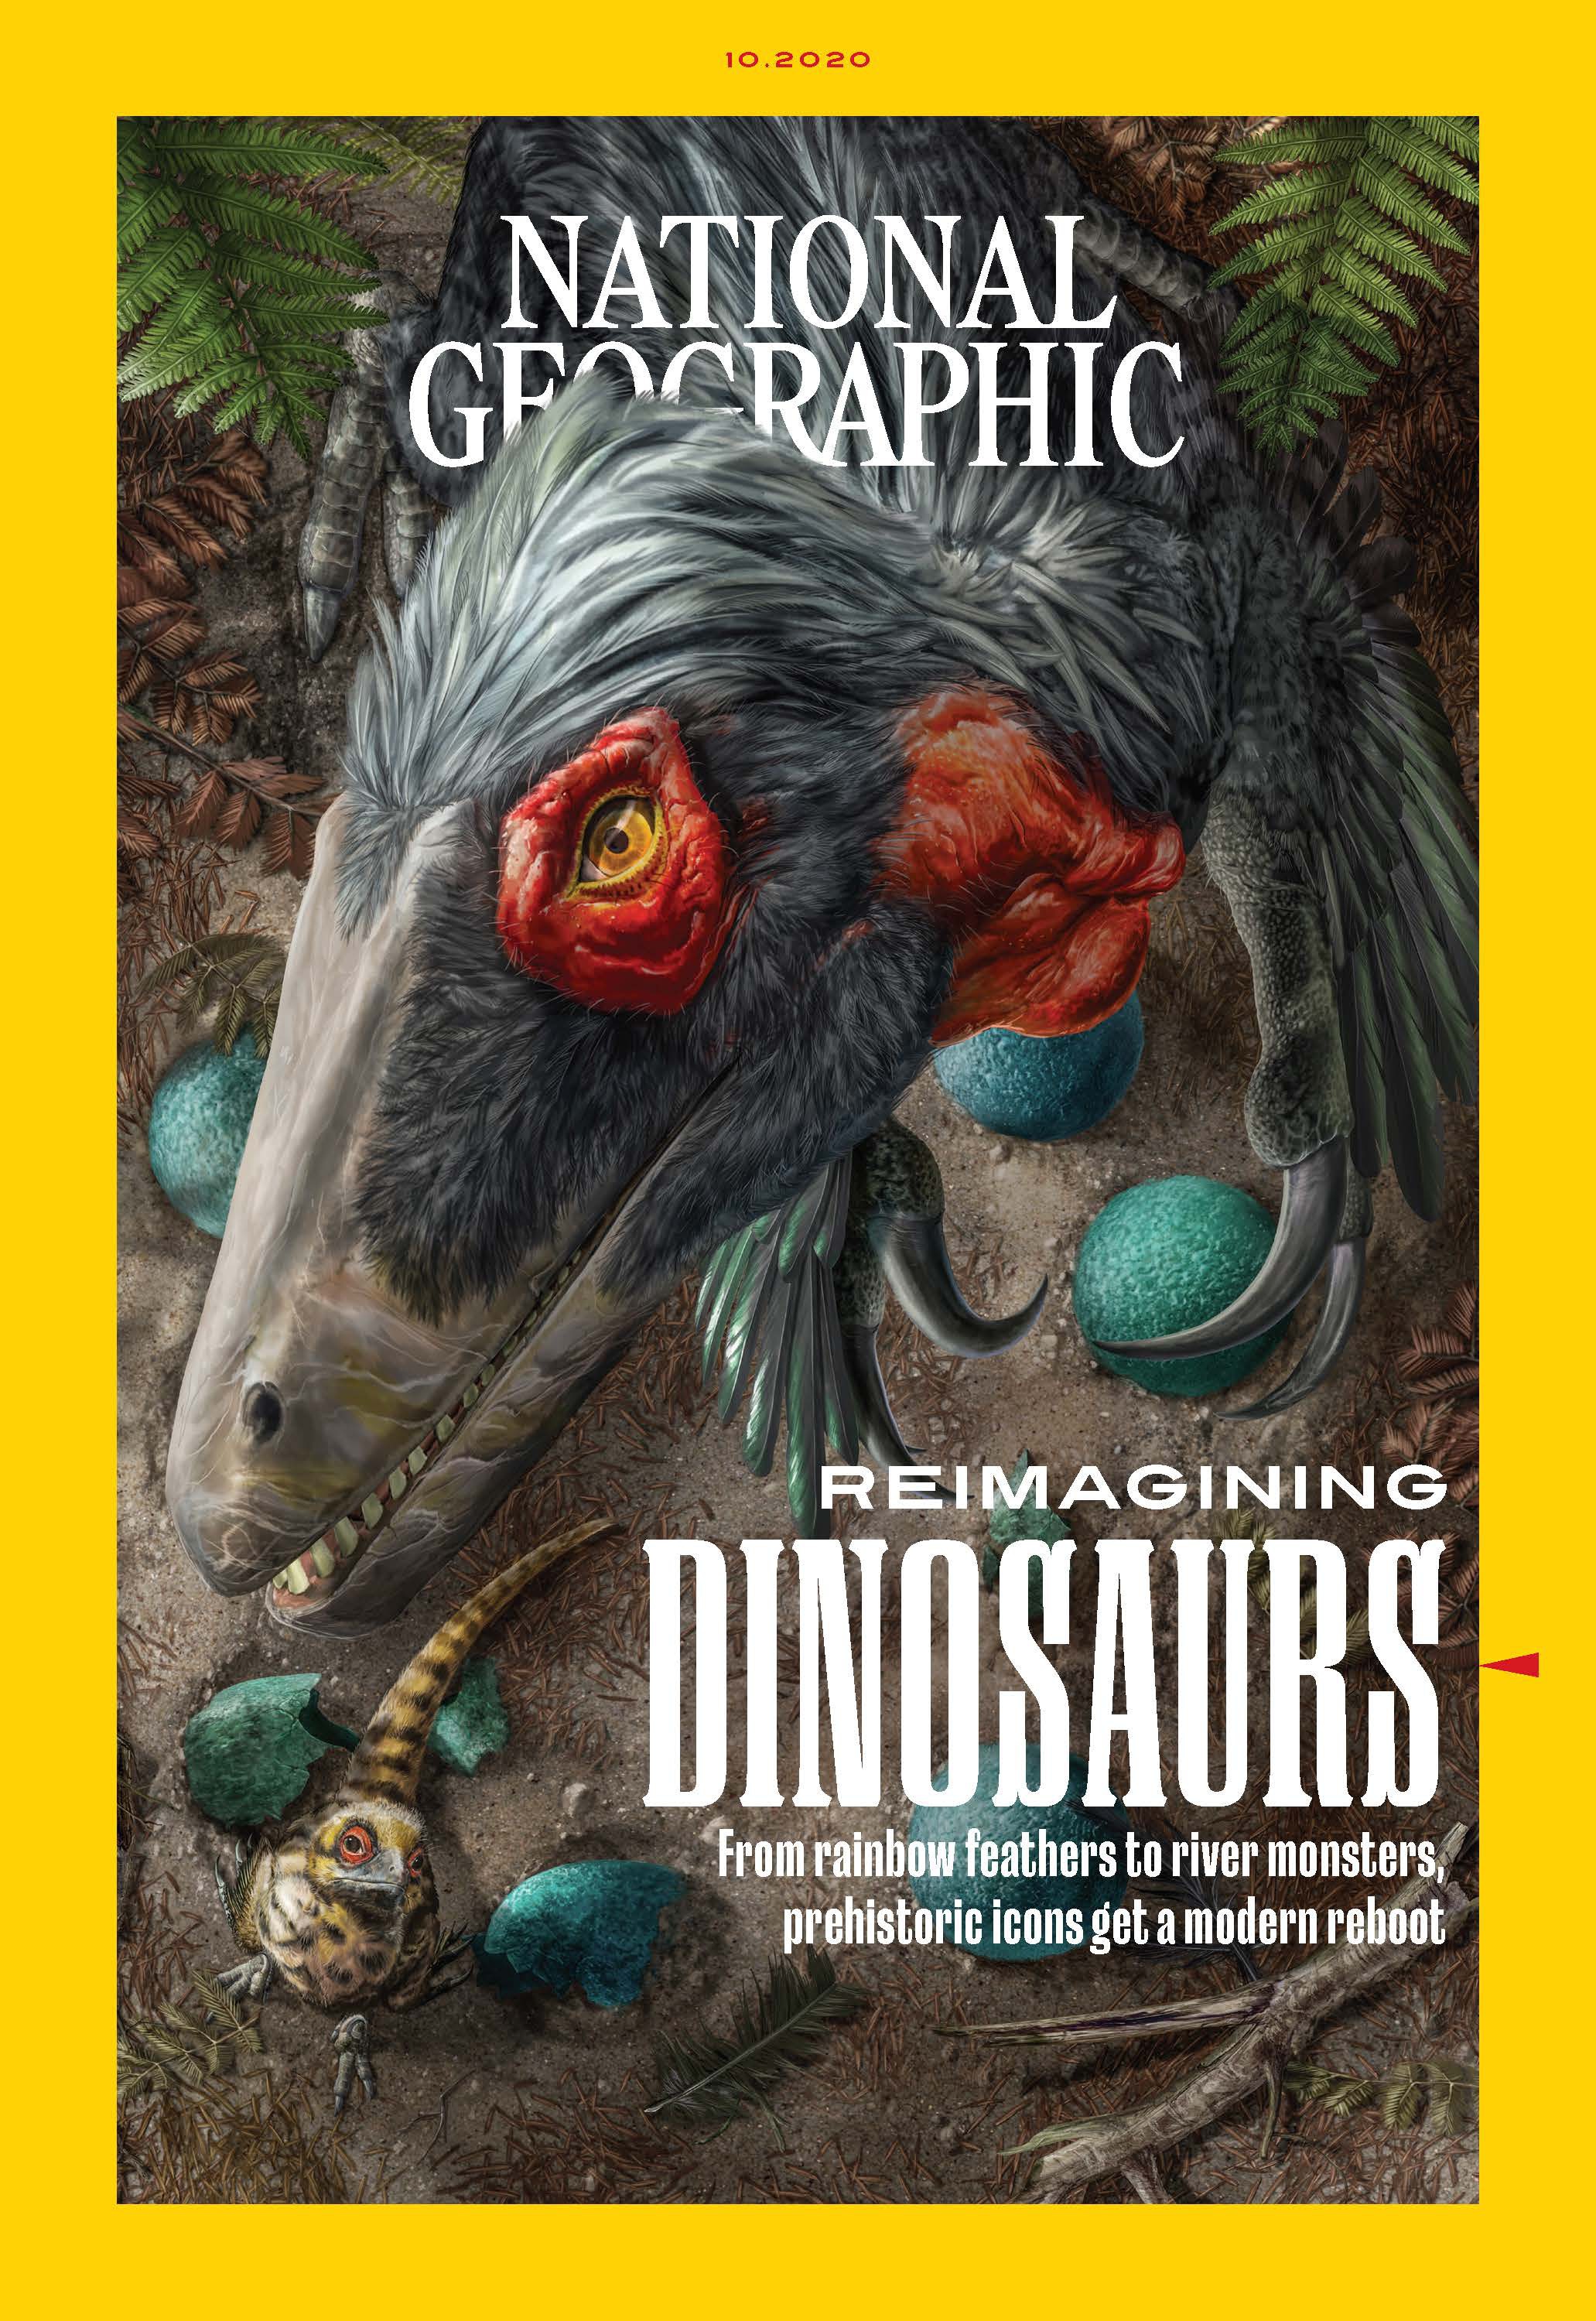 National Geographic Magazine features OHIO professor Witmer in October